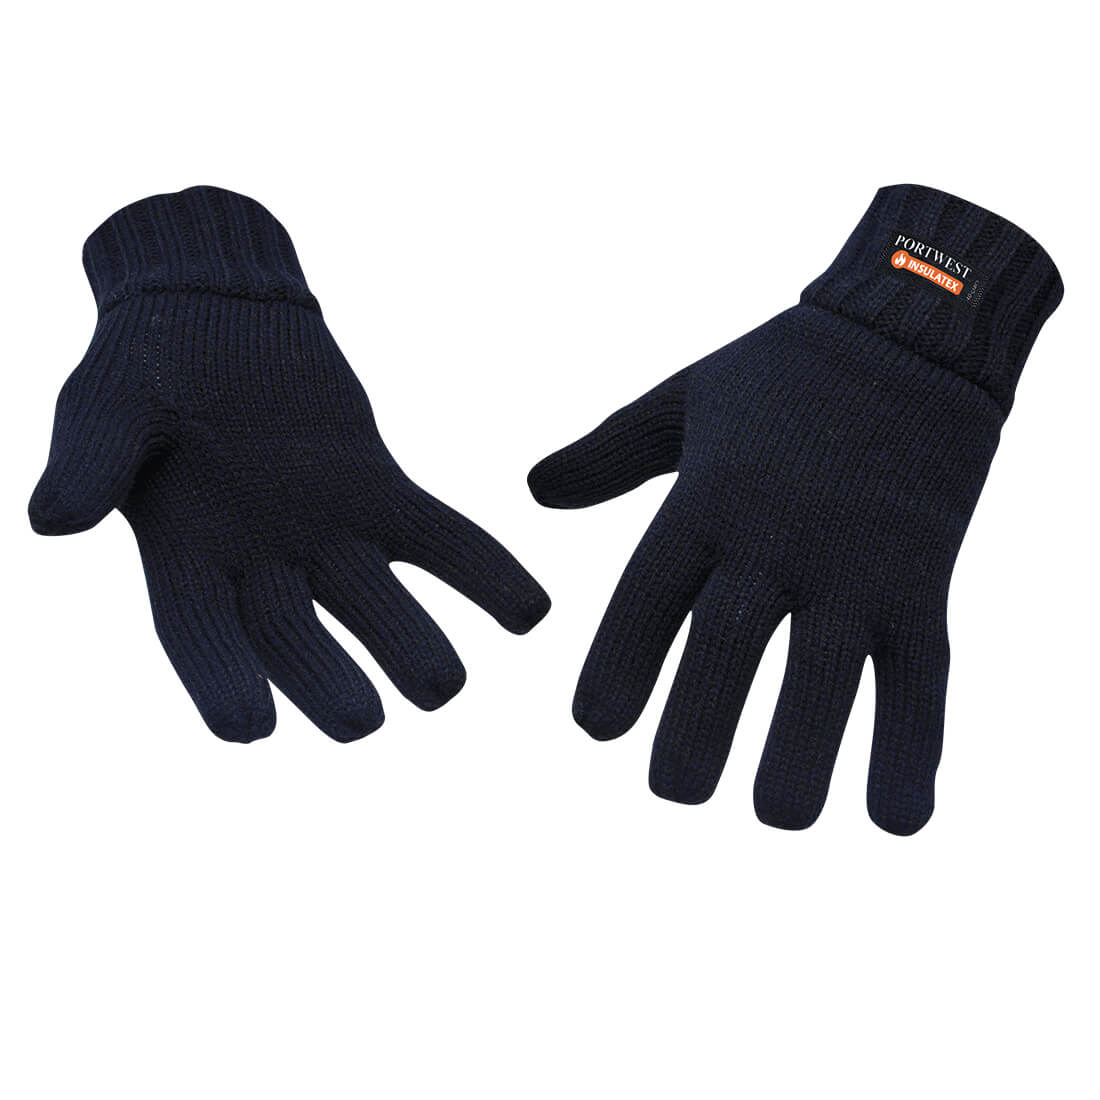 Portwest GL13 Knit Gloves Insulatex Lined 1#colour_navy